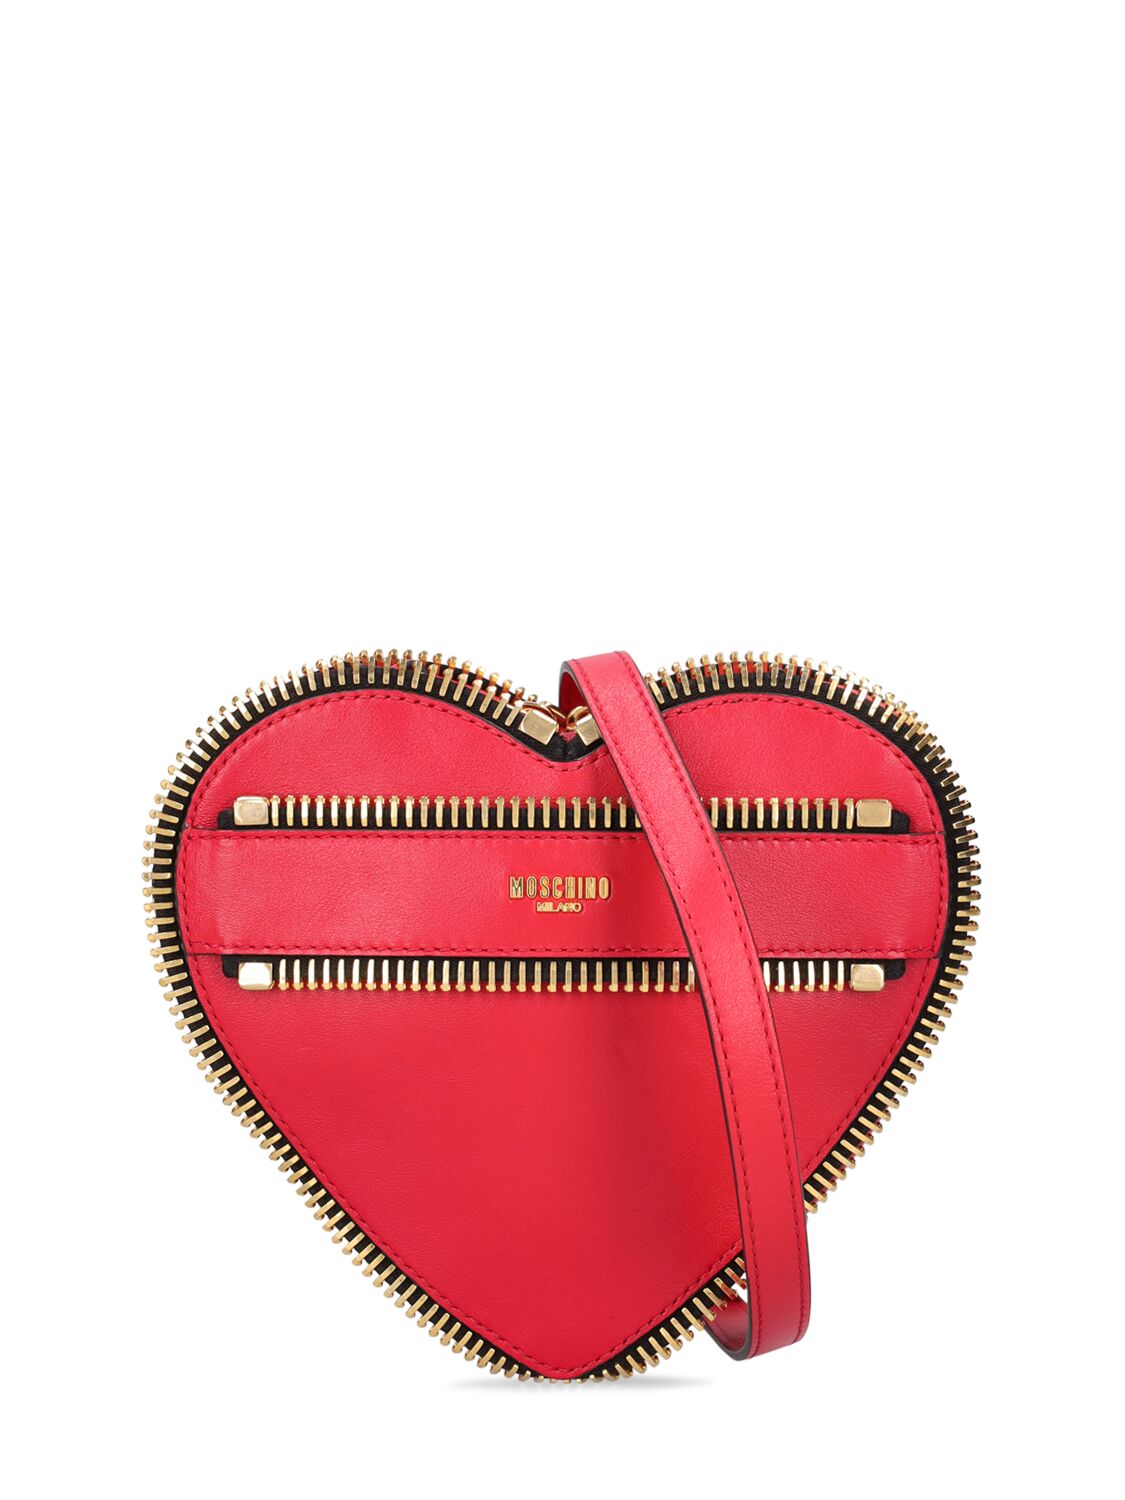 Image of Rider Leather Heart Bag